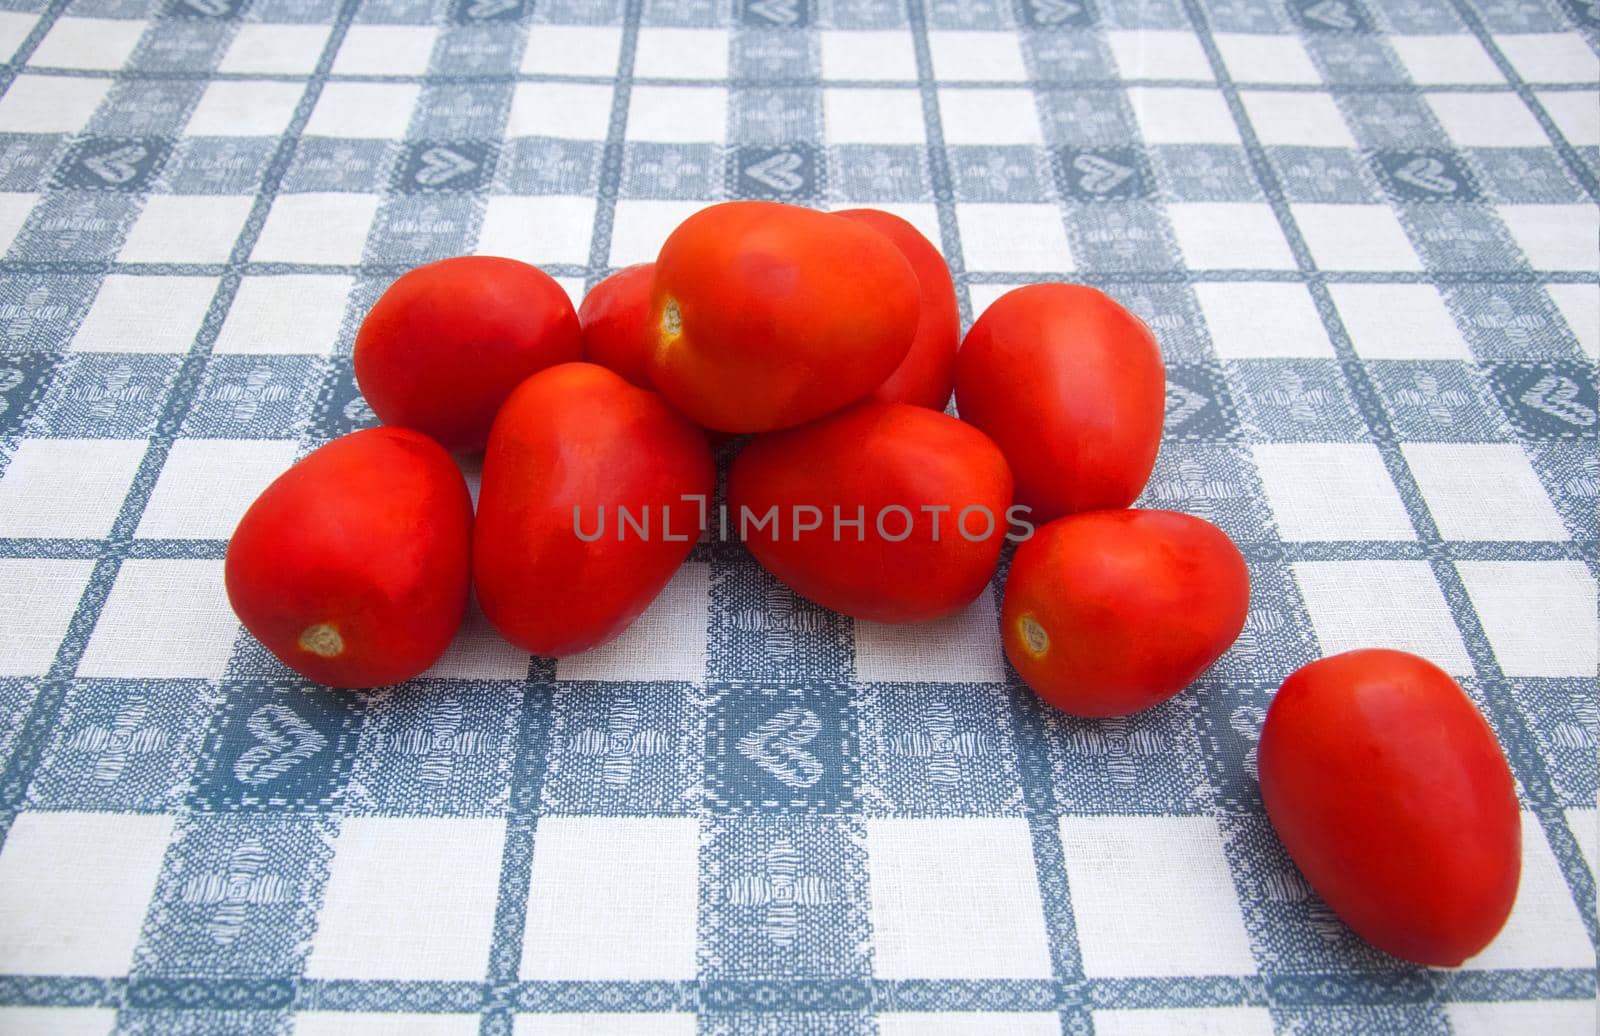 Red plum tomatoes on the table, close up, summer